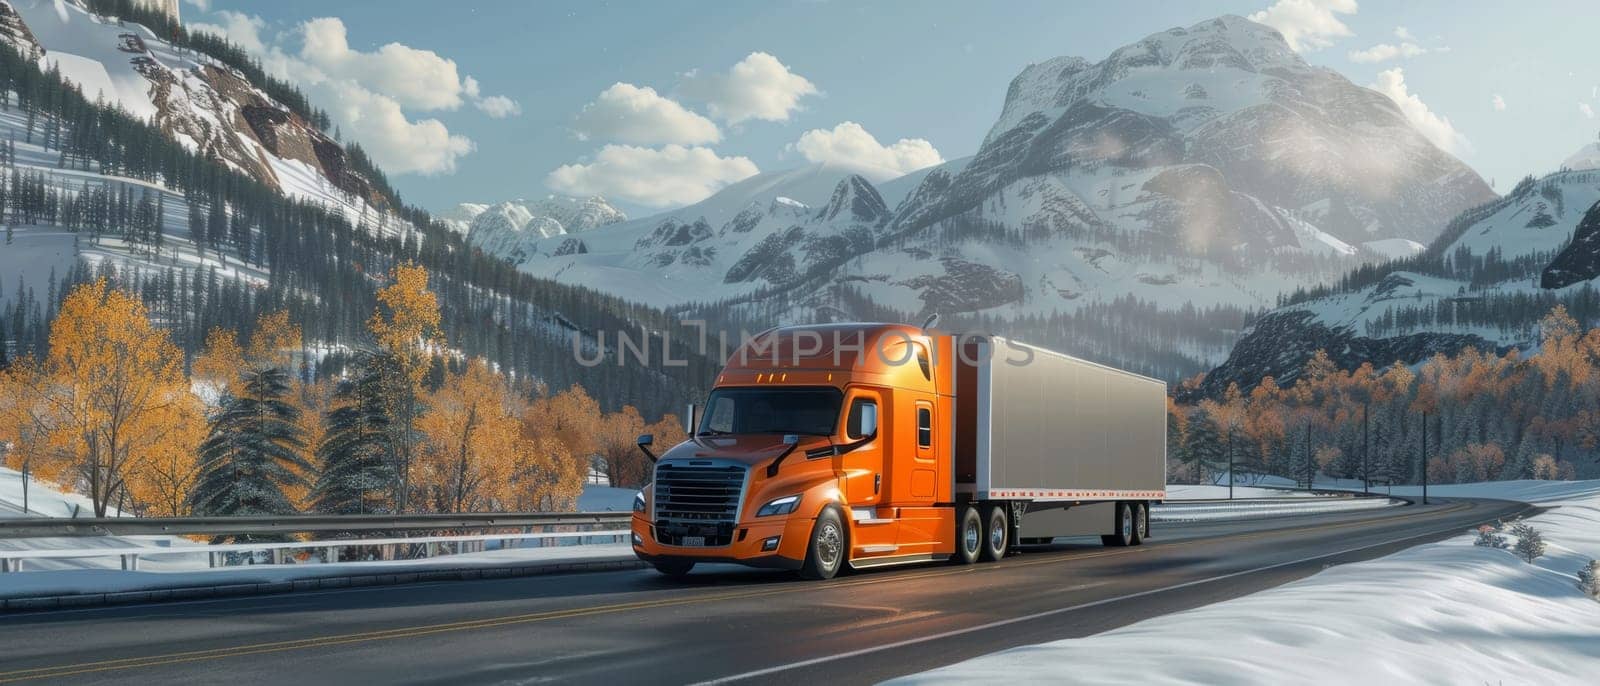 An orange semi truck drives along a snow-lined mountain road with golden aspen trees against snowy peaks. by sfinks